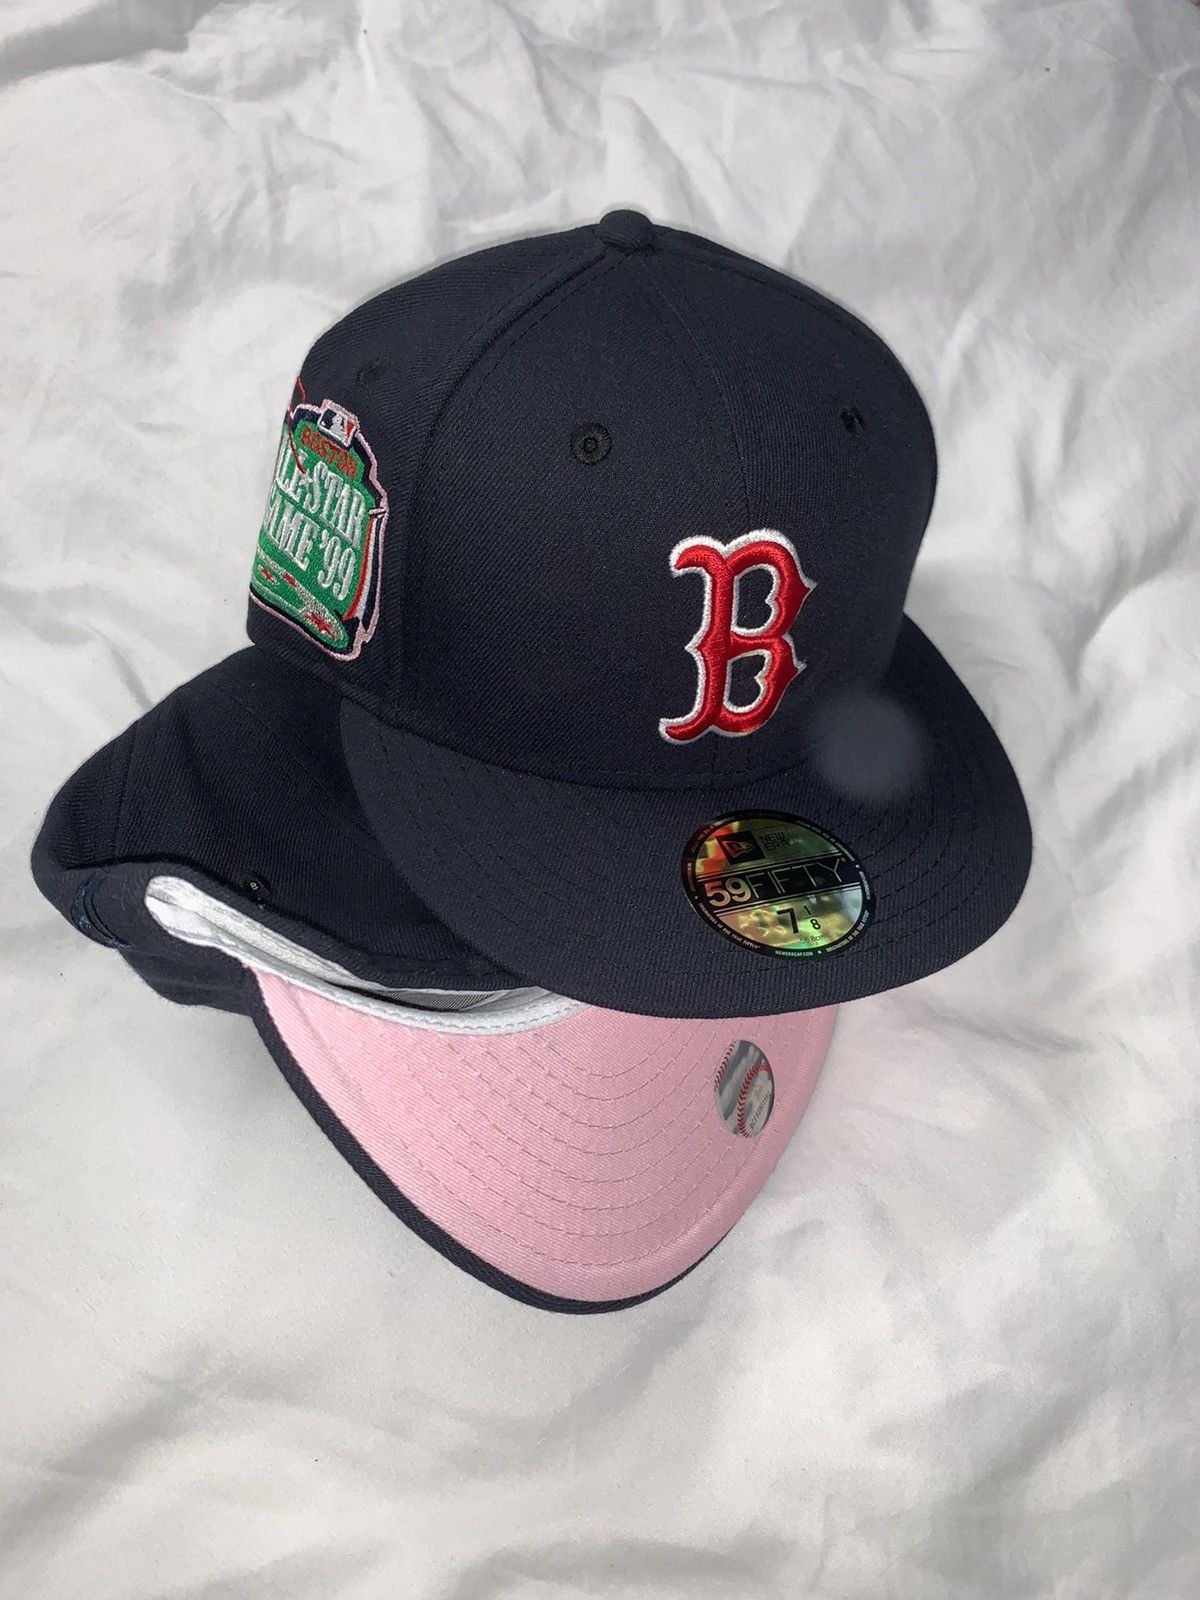 New Era 59Fifty Boston Red Sox Fitted Hat Size 8 Pink Rare 